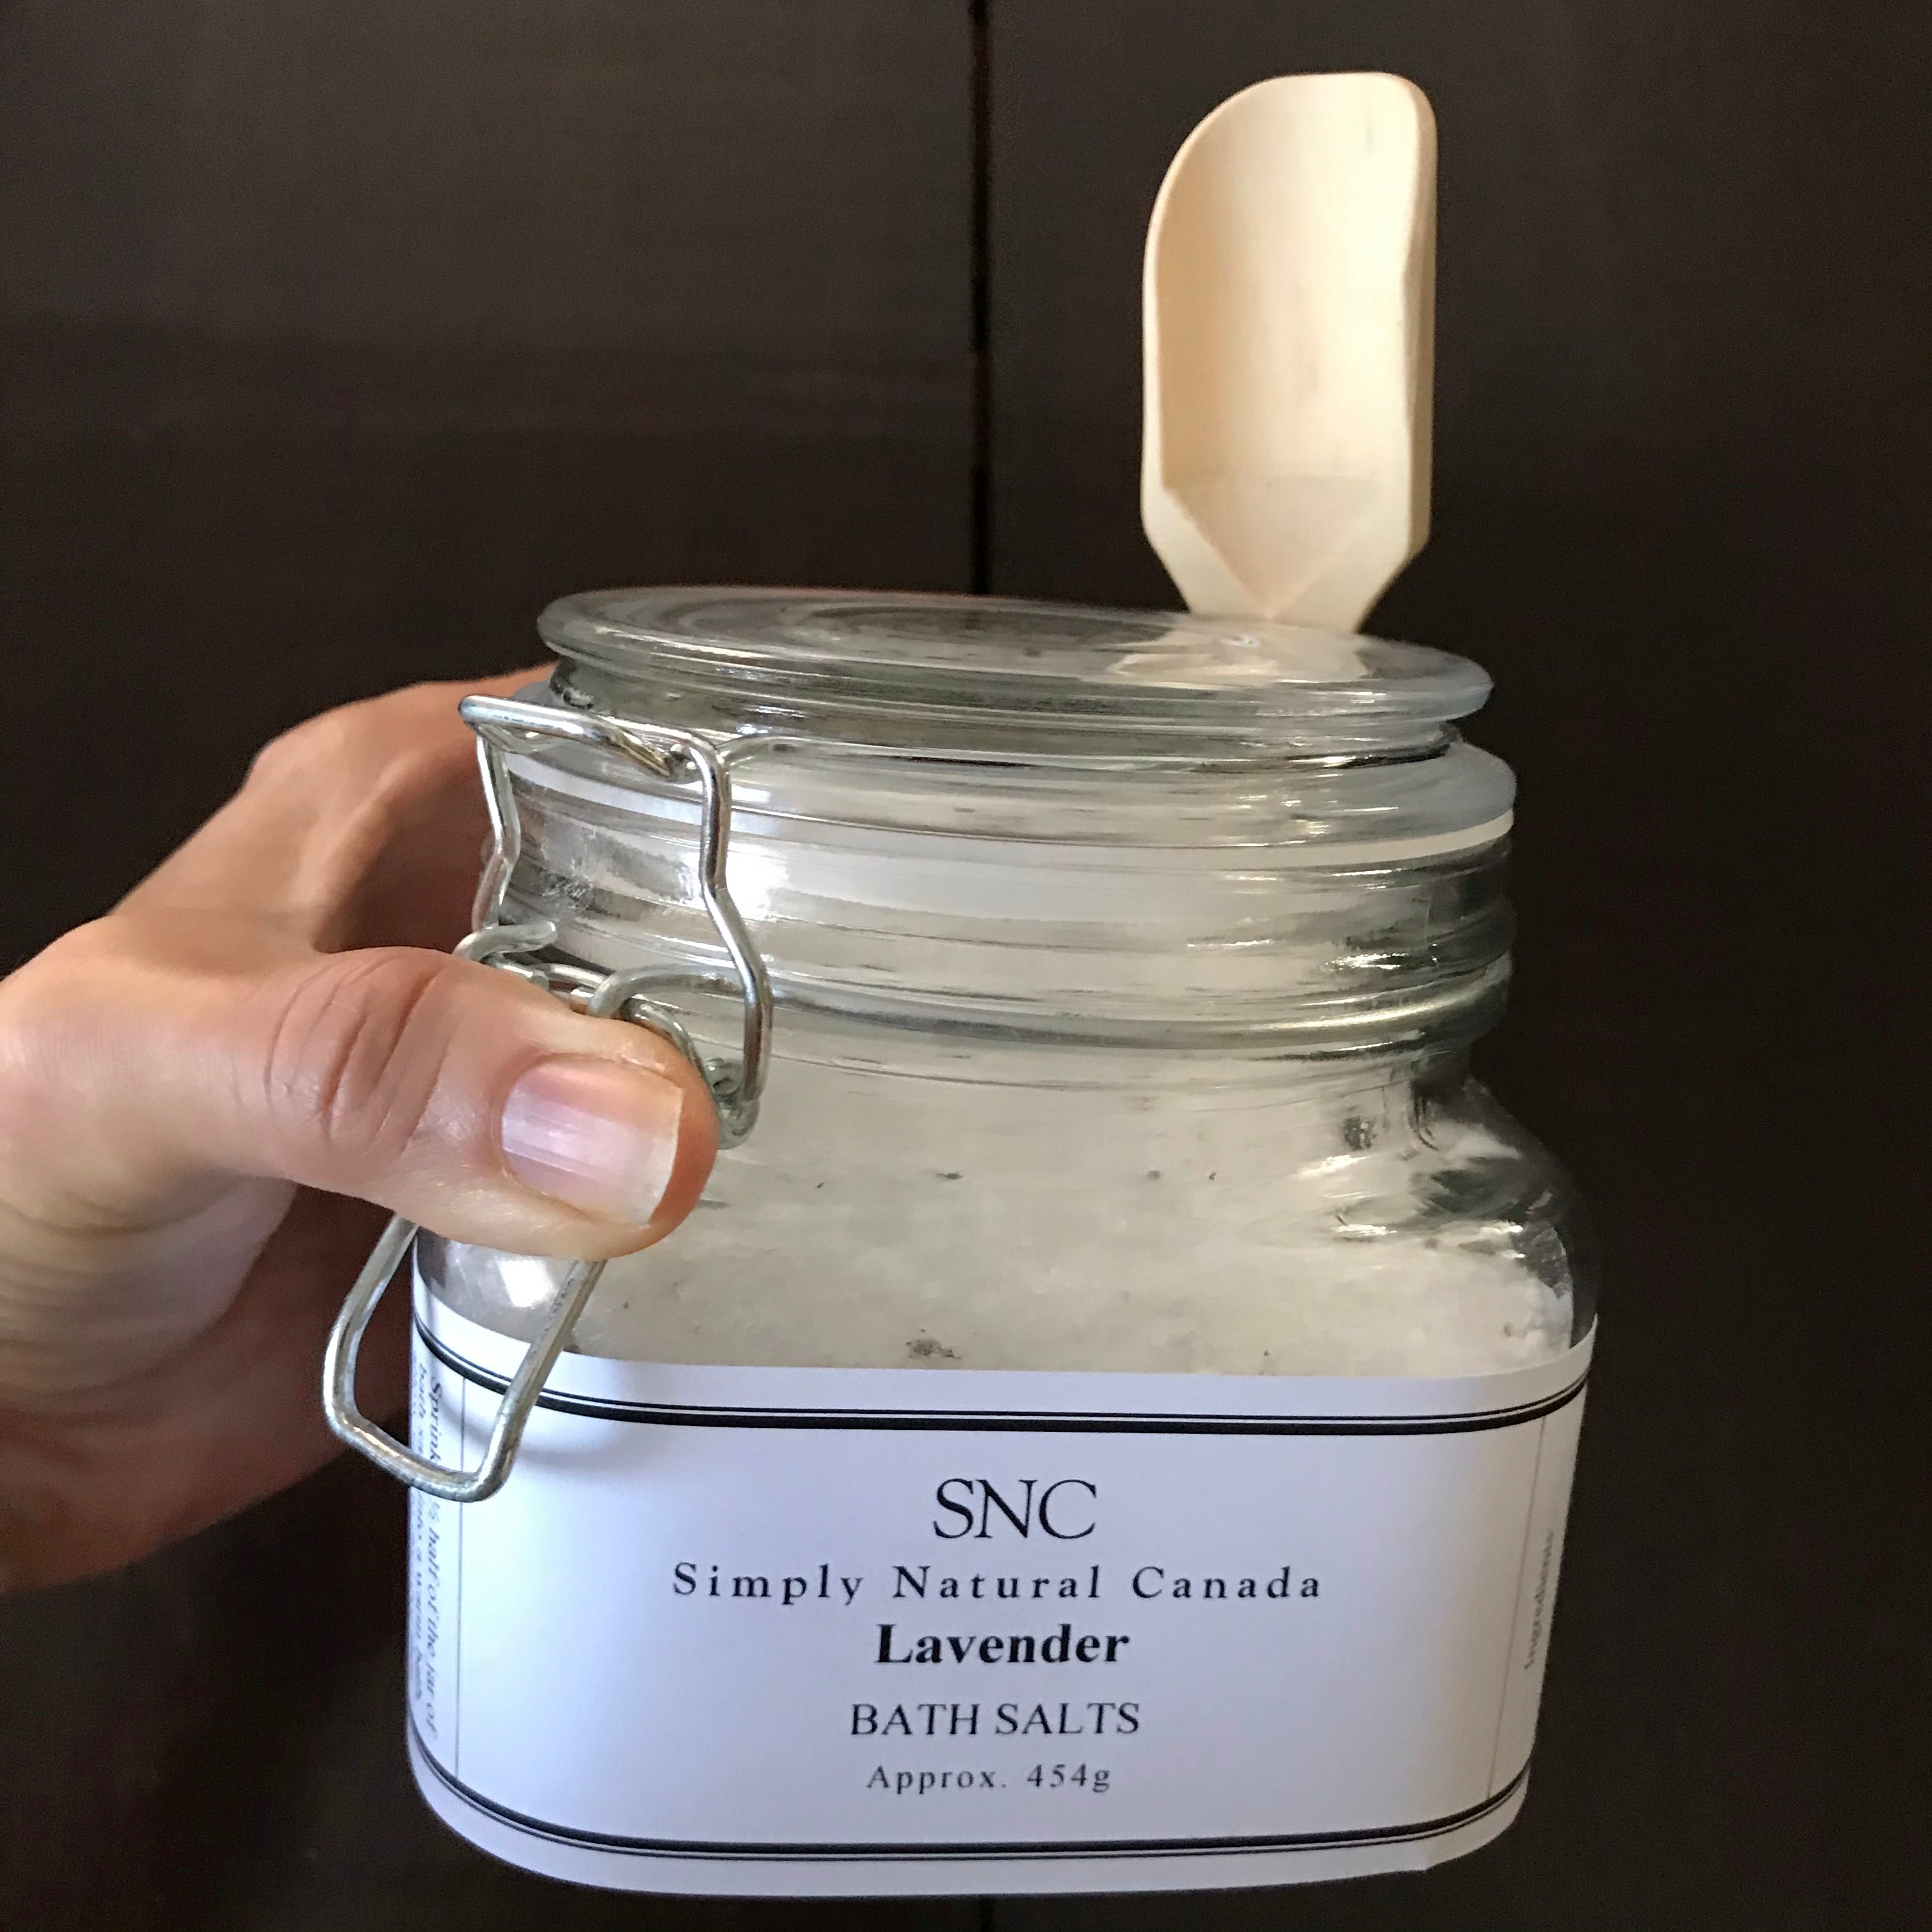 handcrafted lavender bath salts made in canada